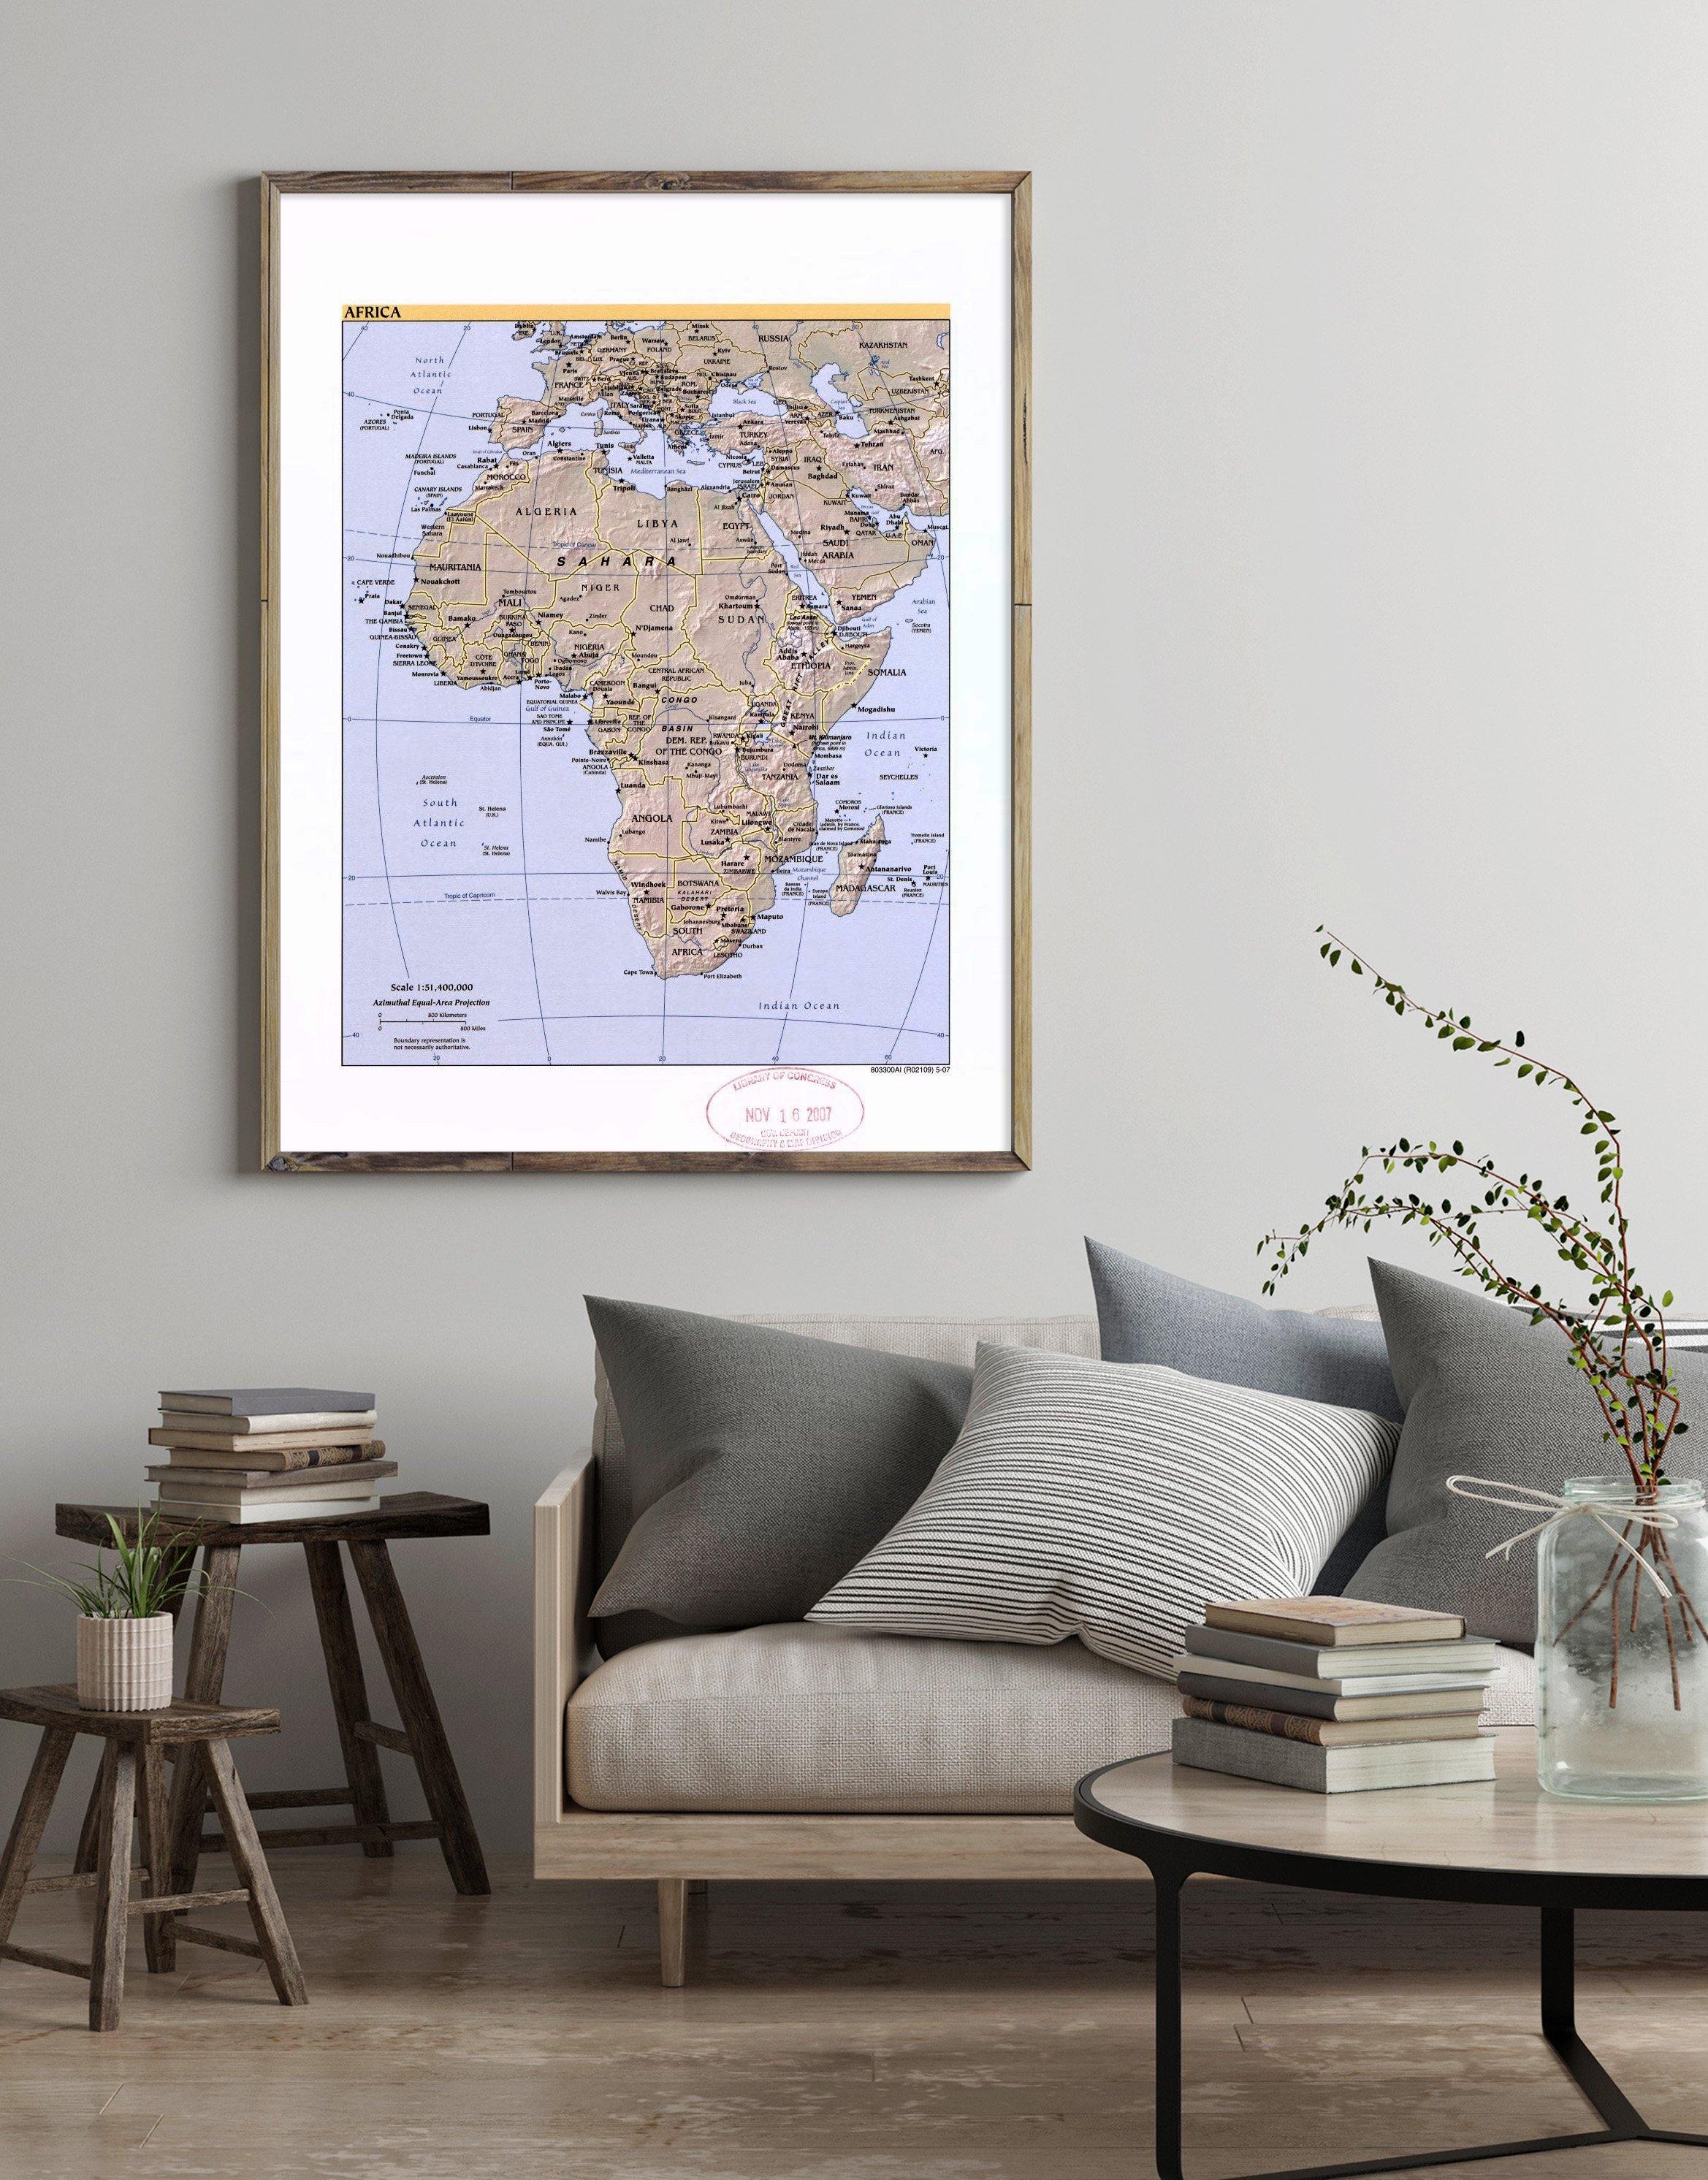 2007 Map| Africa| Africa Map Size: 18 inches x 24 inches |Fits 18x24 s - New York Map Company